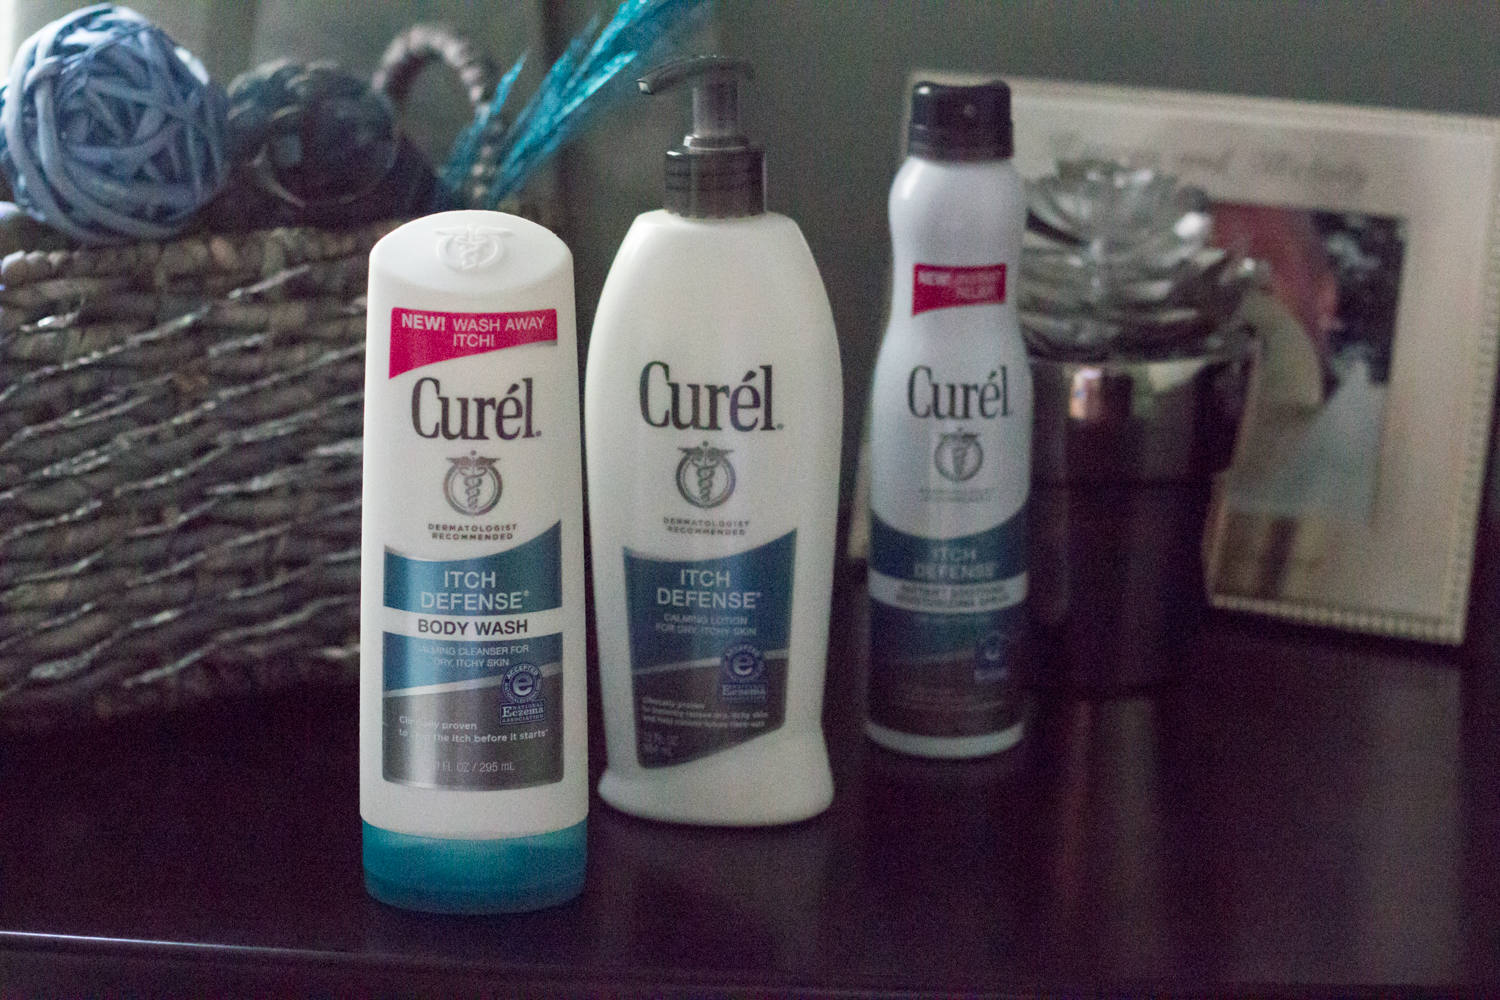 Curel Itch Defense is a great line for fighting dry itchy skin during the winter months. 